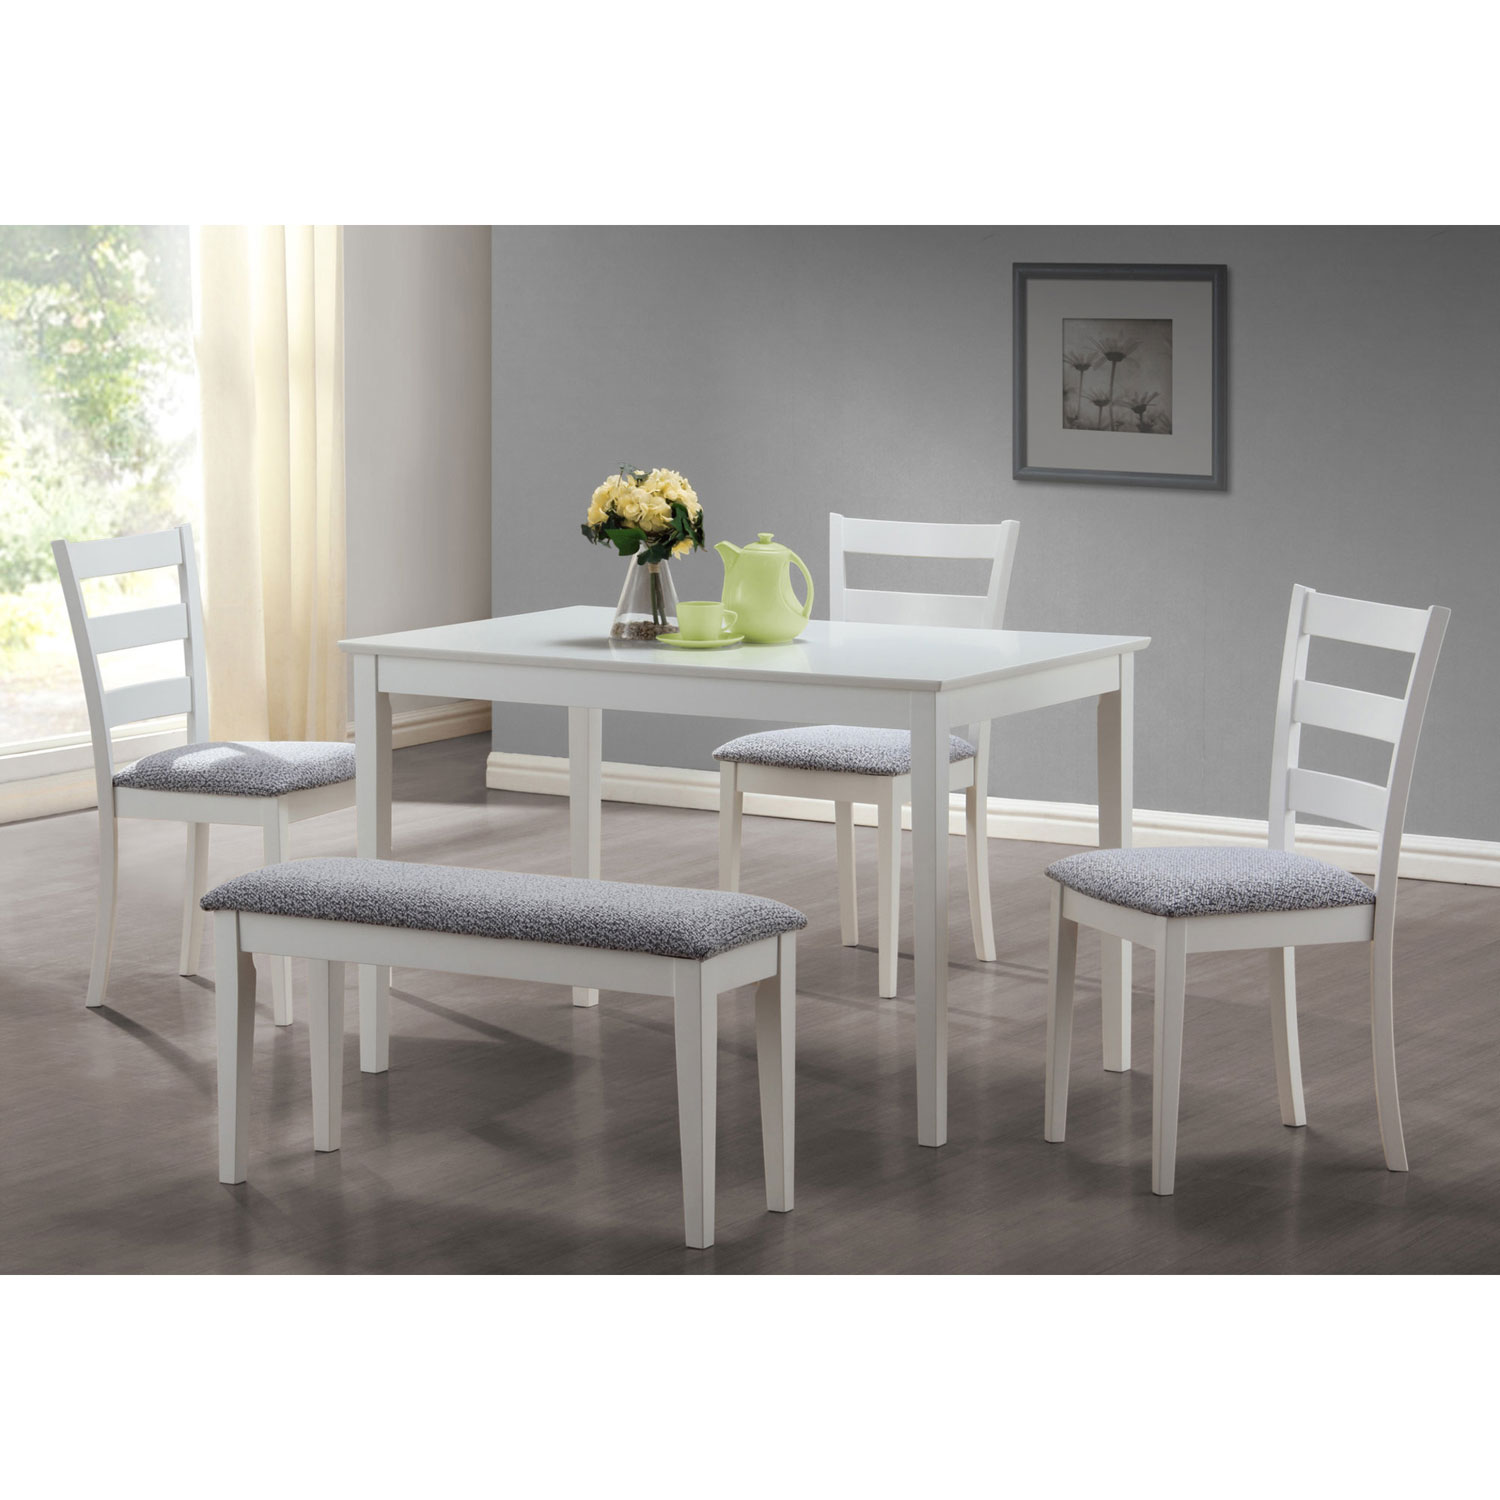 Contemporary 5 Piece Casual Dining Set With Bench White Best Buy Canada